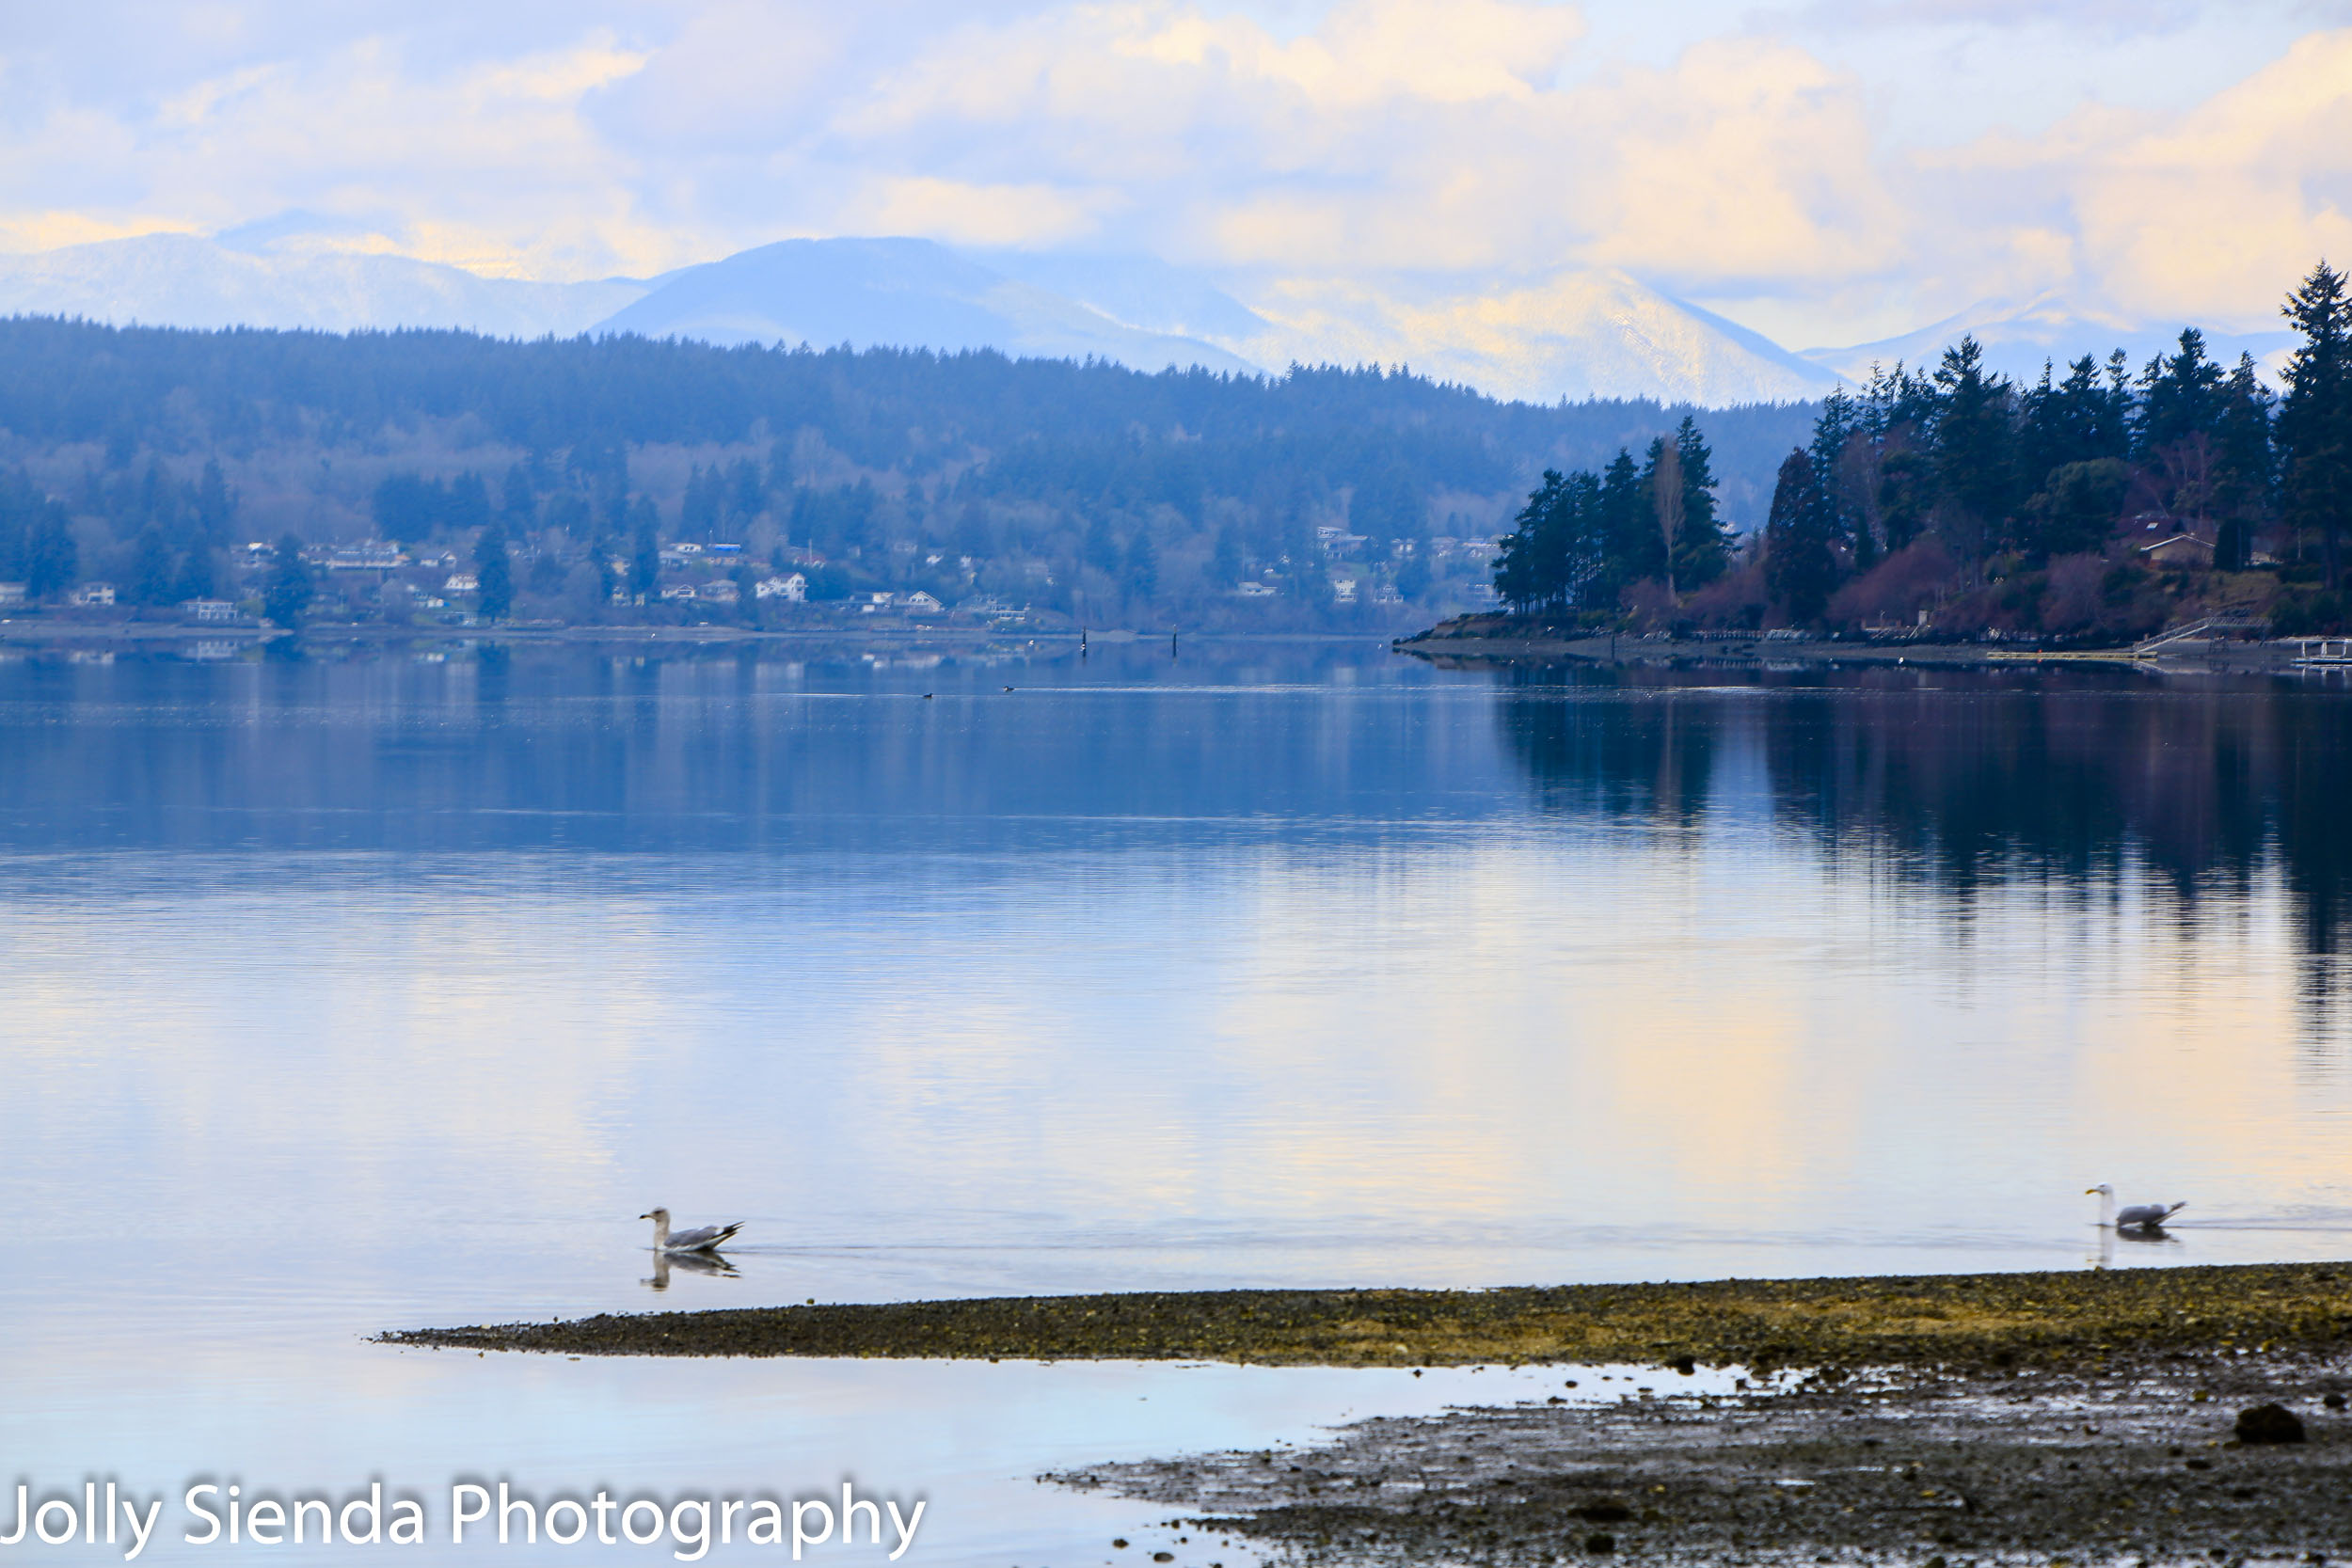 Seagulls glide on a calm bay with the Olympic Mountains in the b